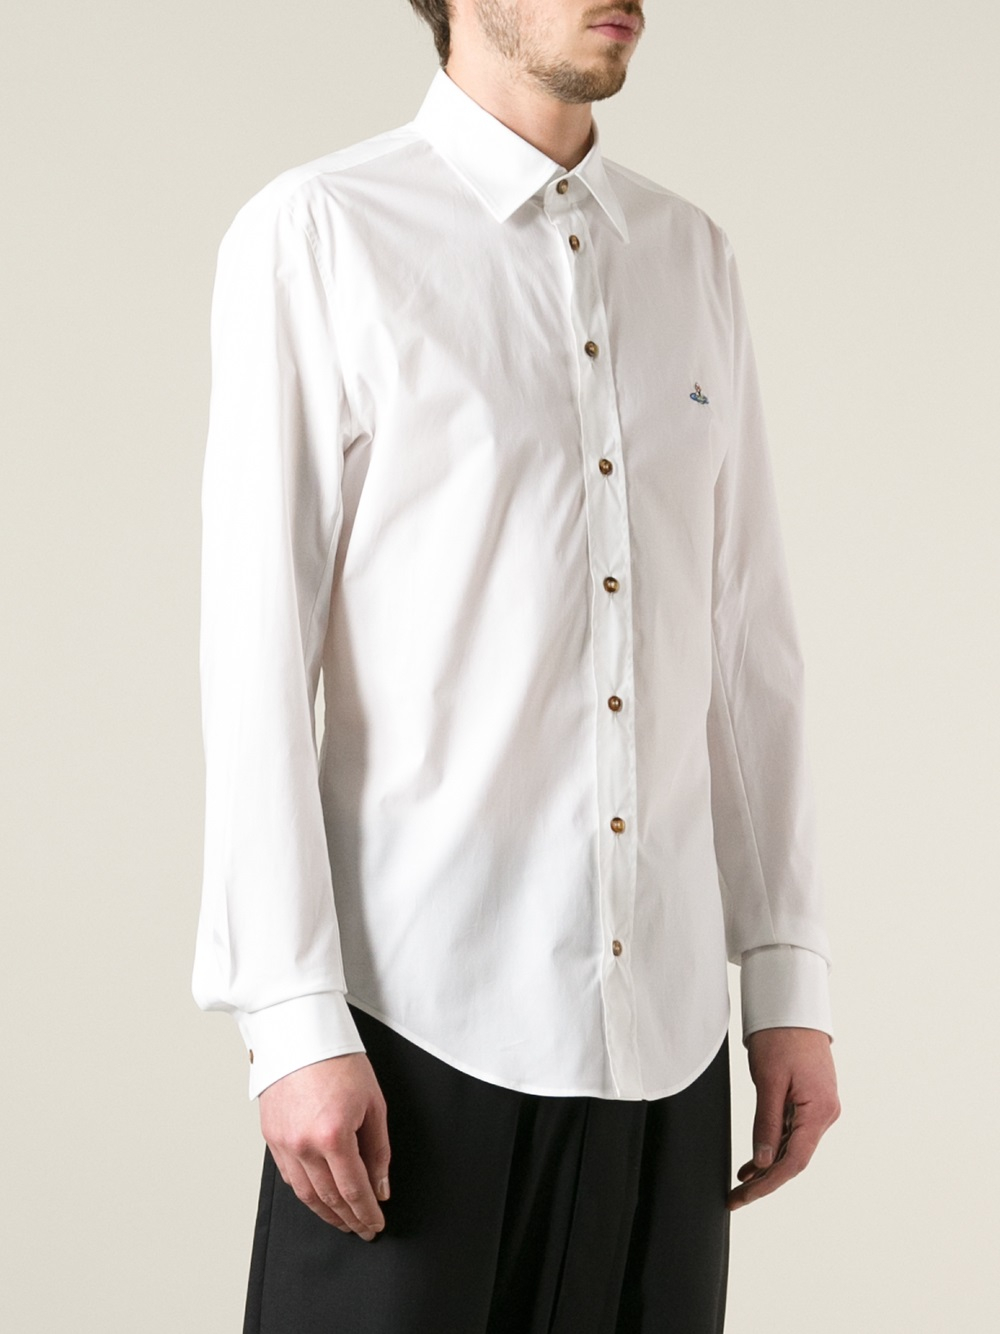 Vivienne Westwood Collared Shirt in White for Men - Lyst